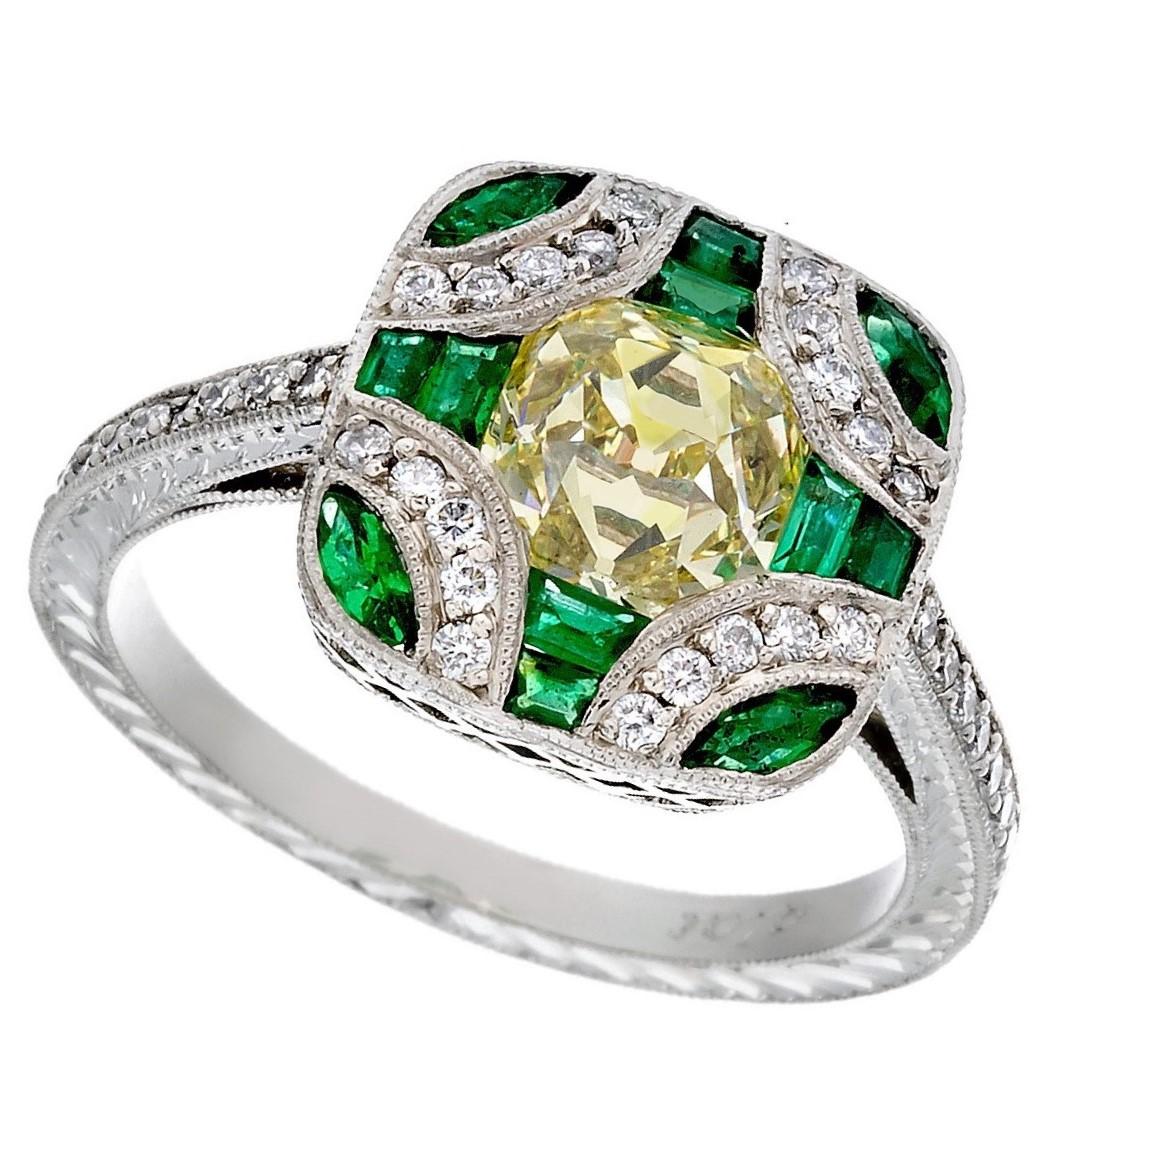 Antique Edwardian Style Fancy Yellow Old Mine Cut Diamond and Emerald Ring im Angebot 2